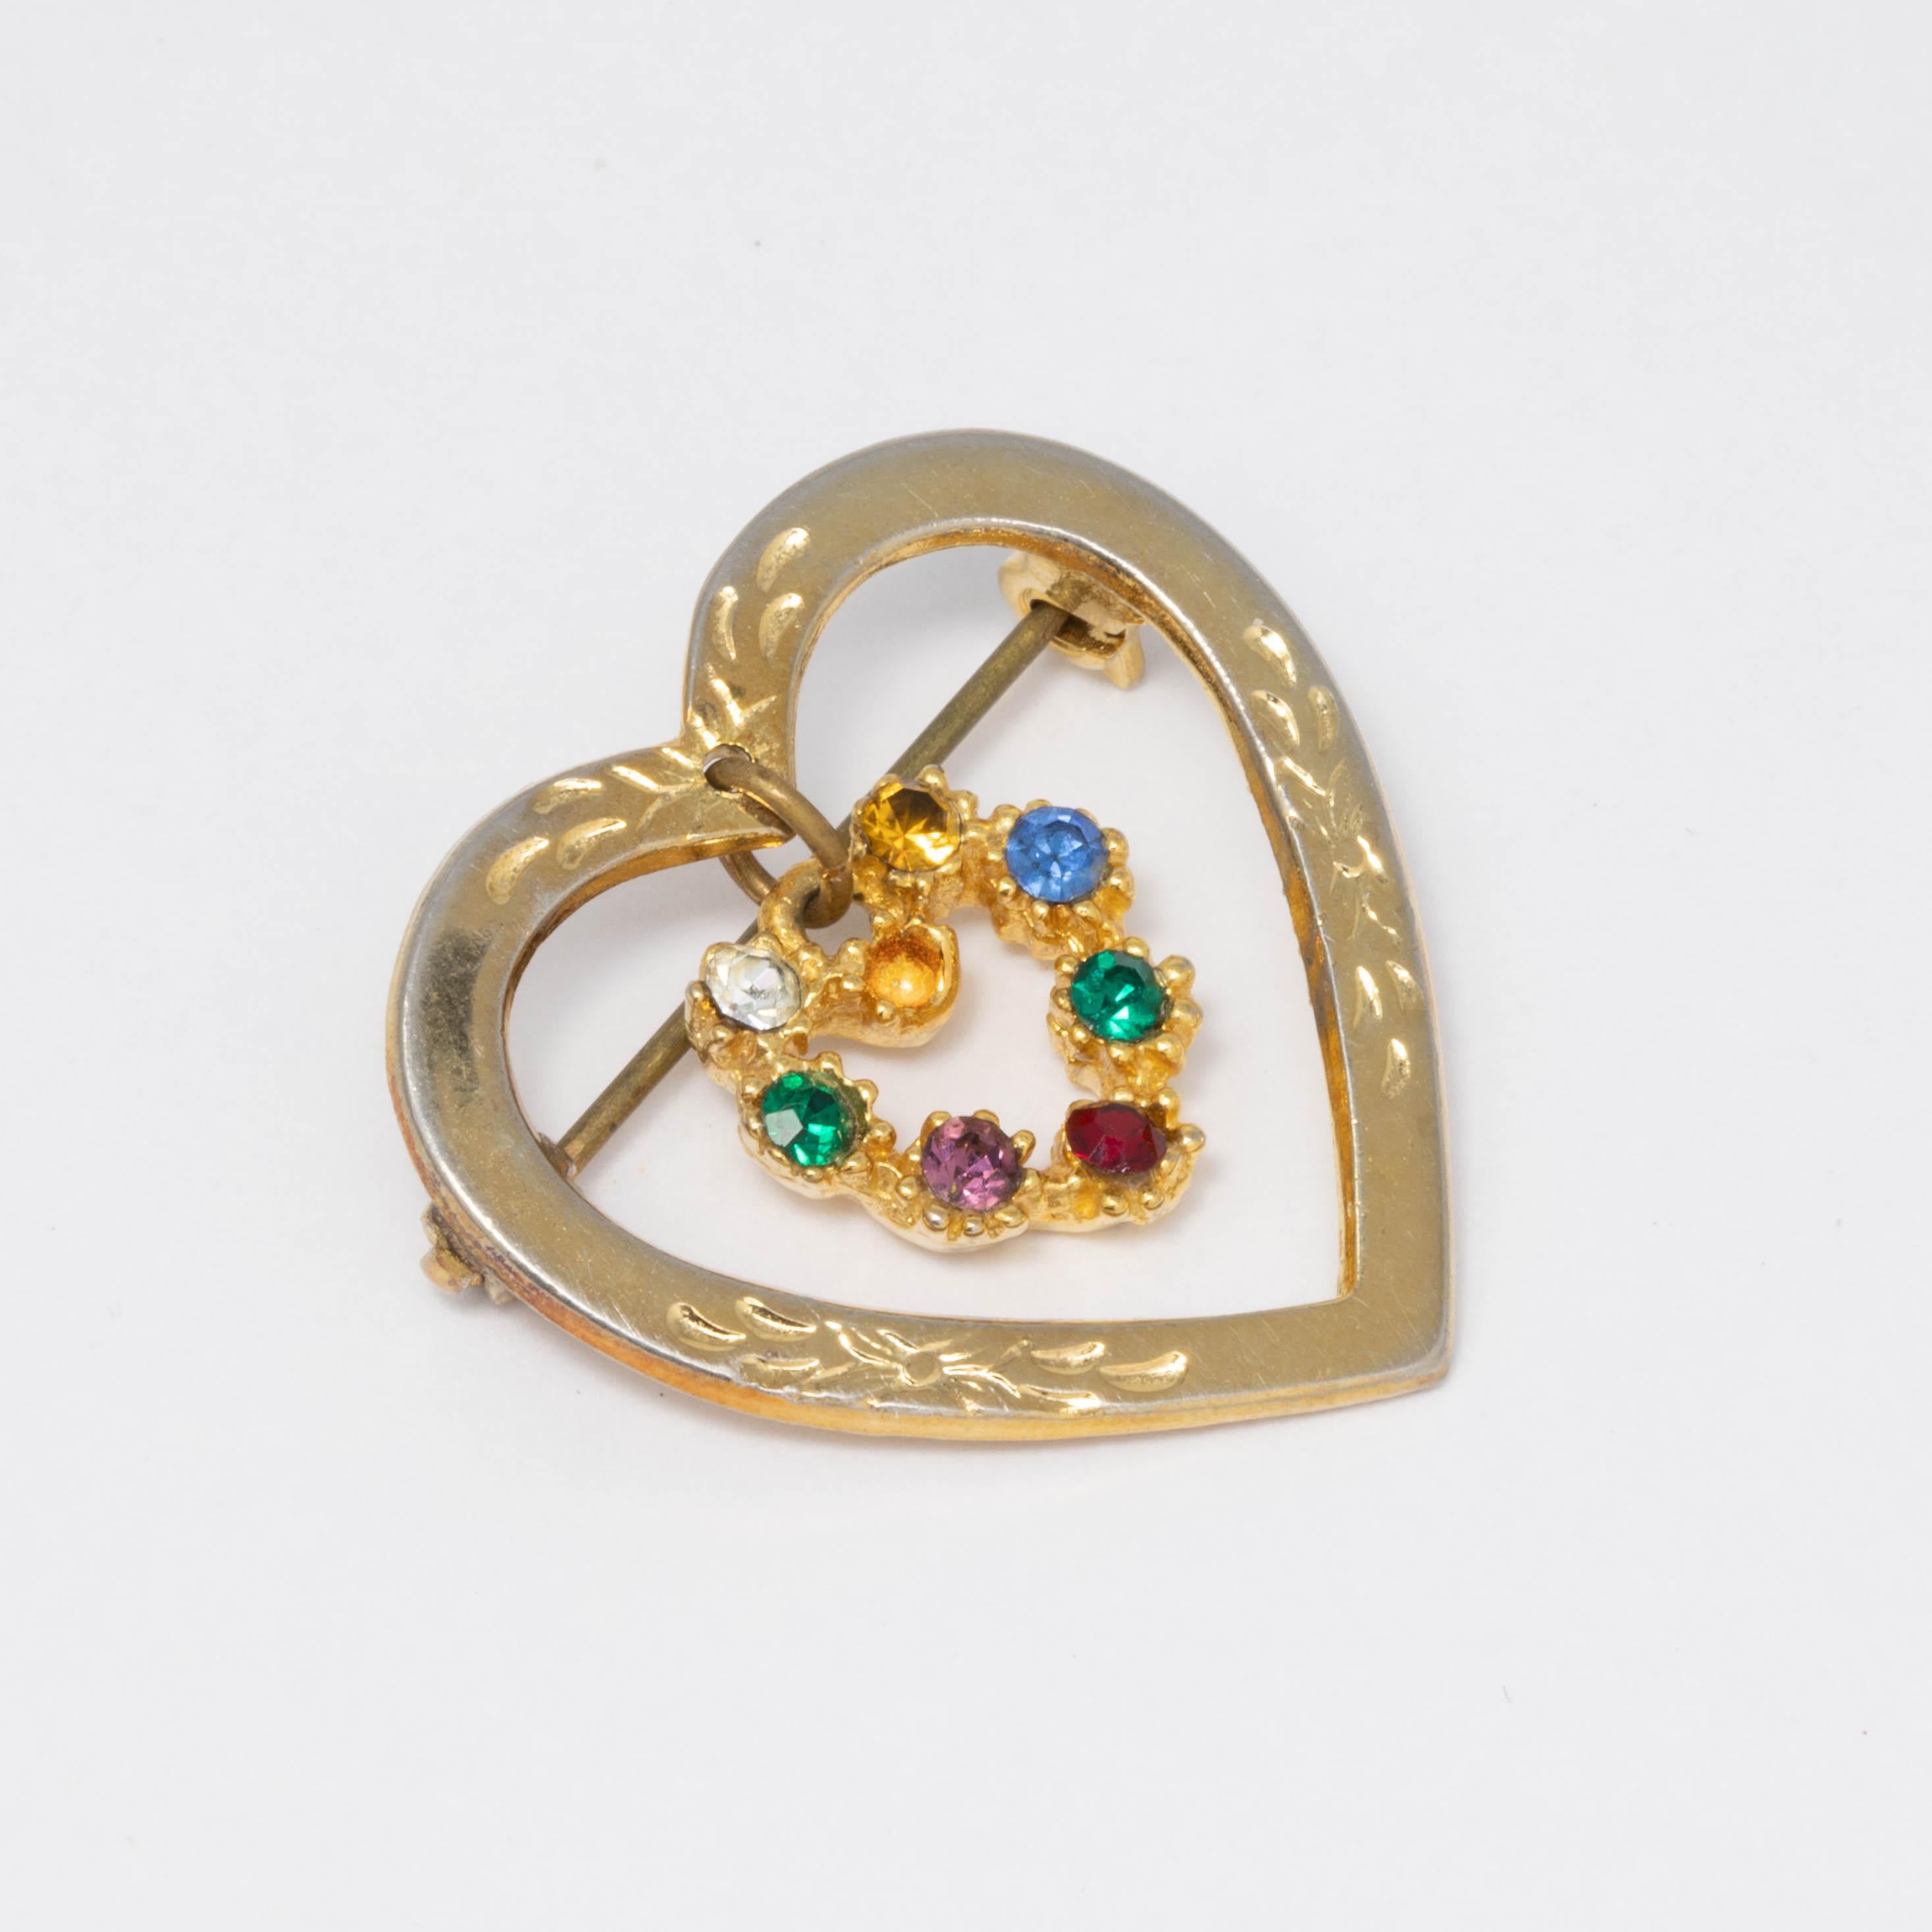 An accented gold tone open-center heart, with a second crystal-encrusted heart dangling inside. 

Mid 1900s pin brooch.